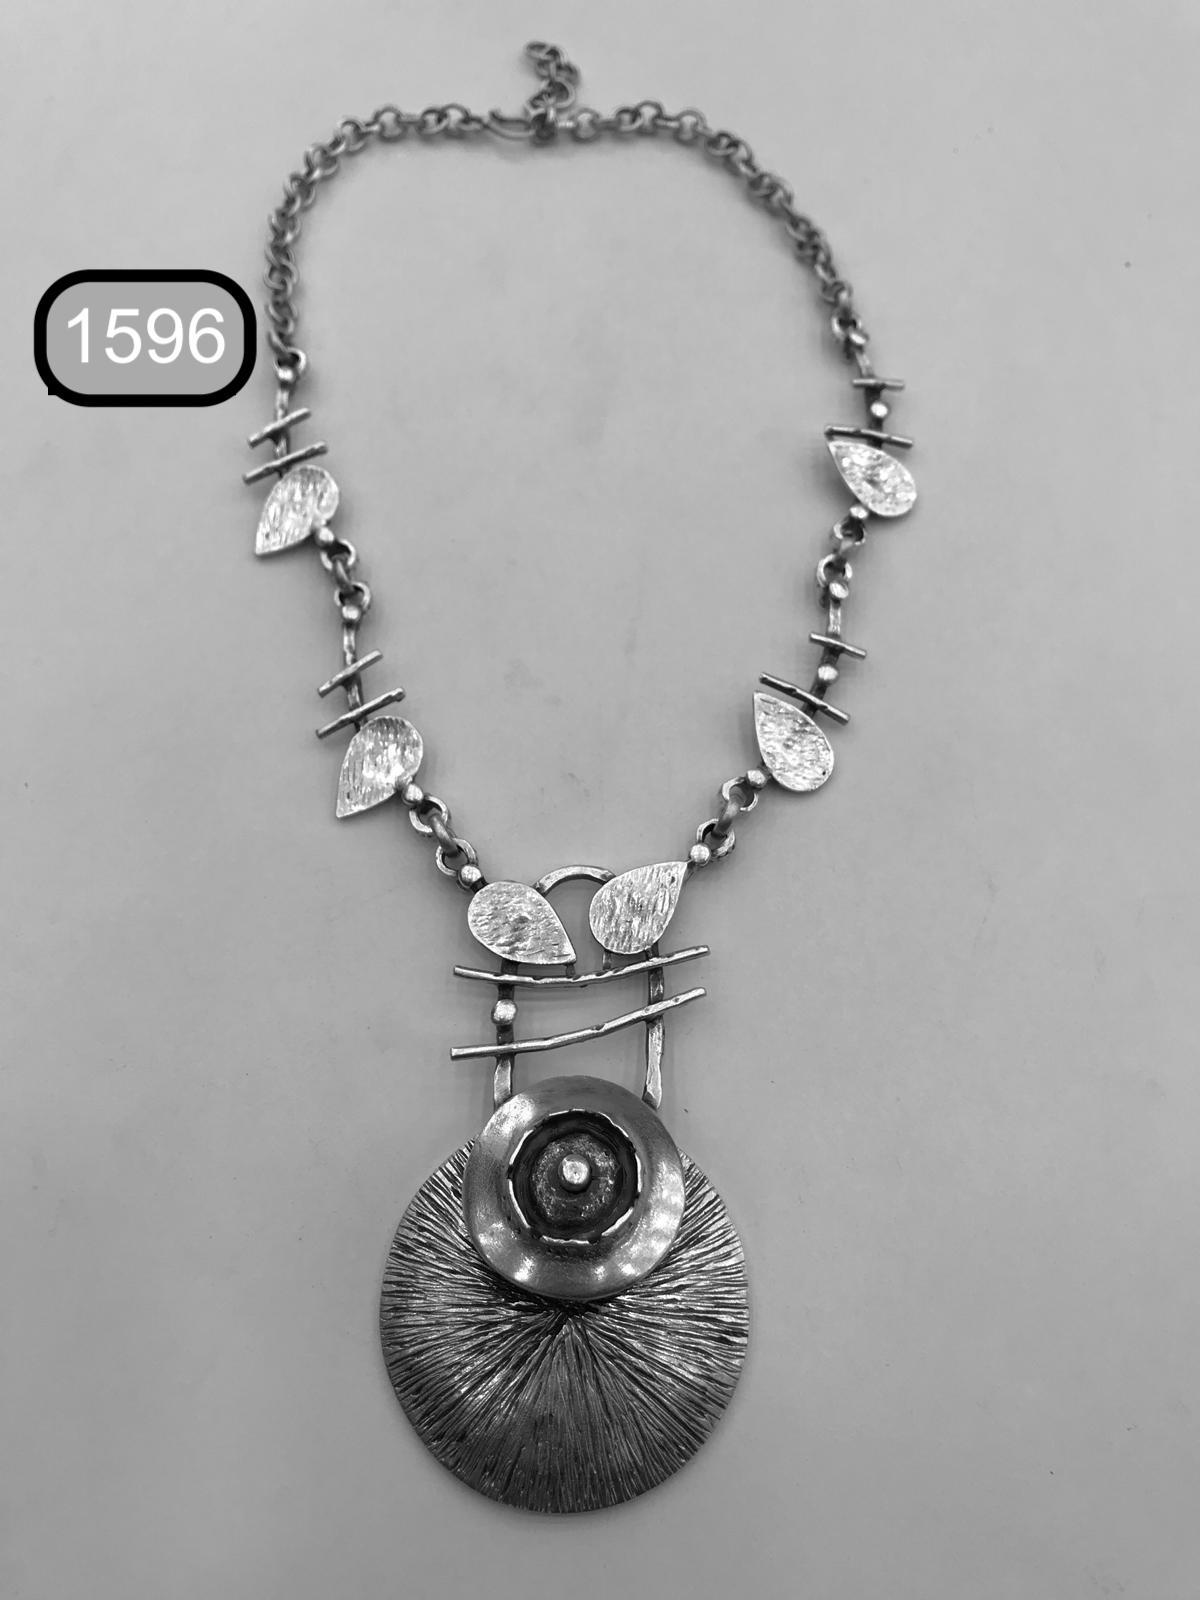 NECKLACE 1596